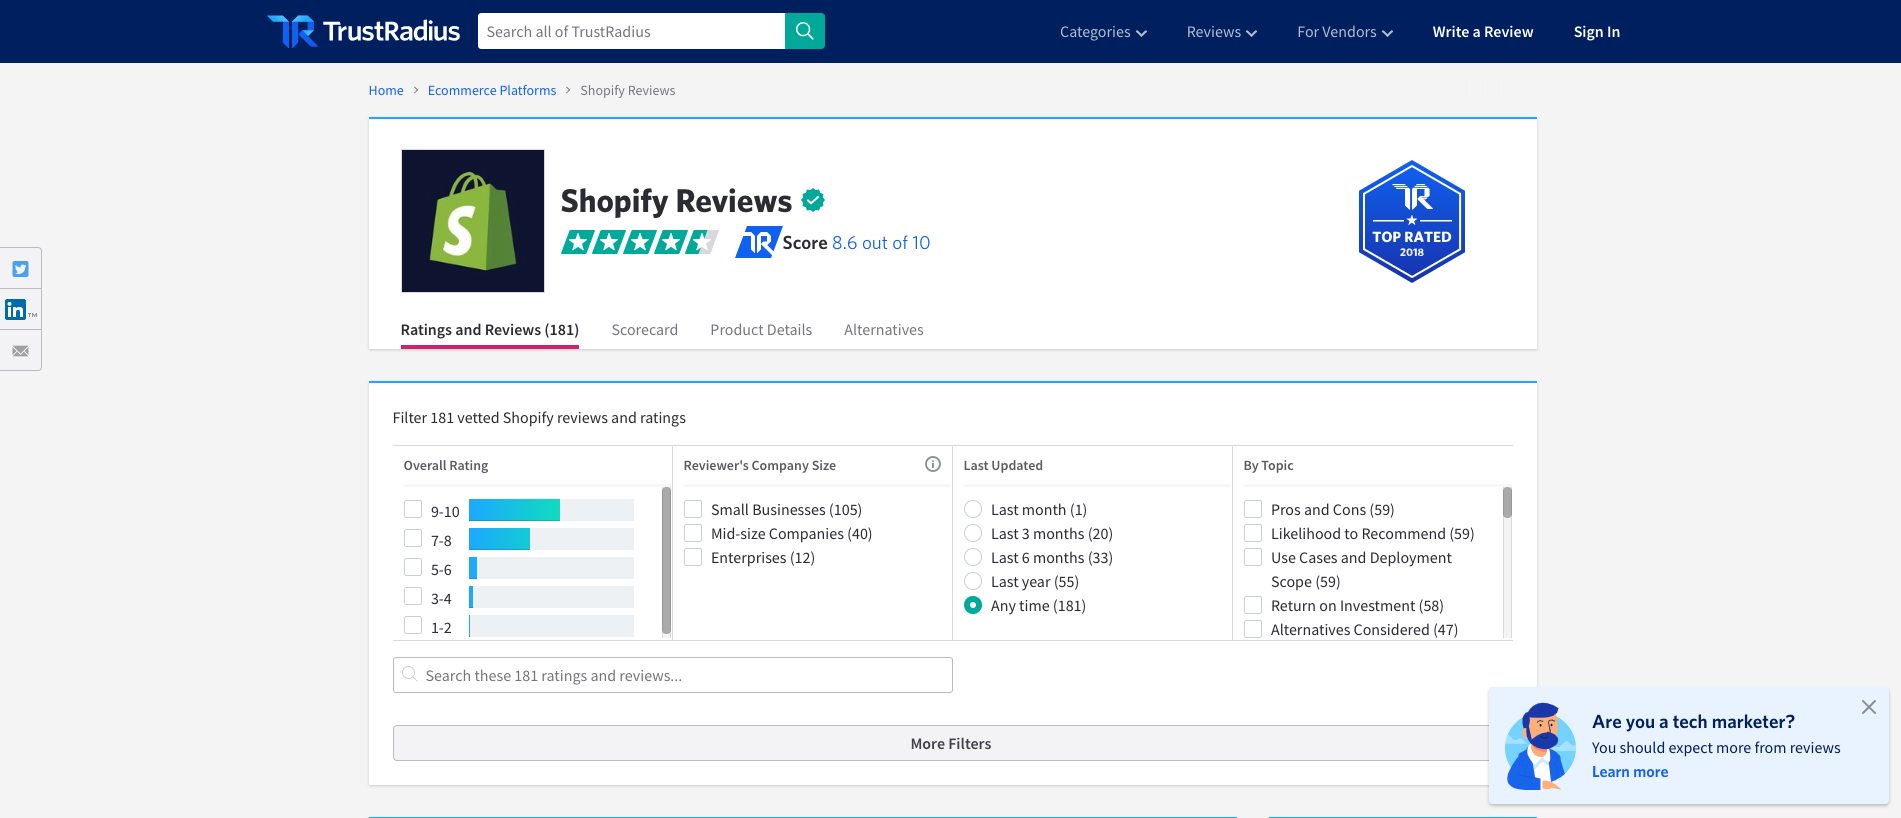 Screenshot of the TrustRadius interface showcasing the Shopify review page.